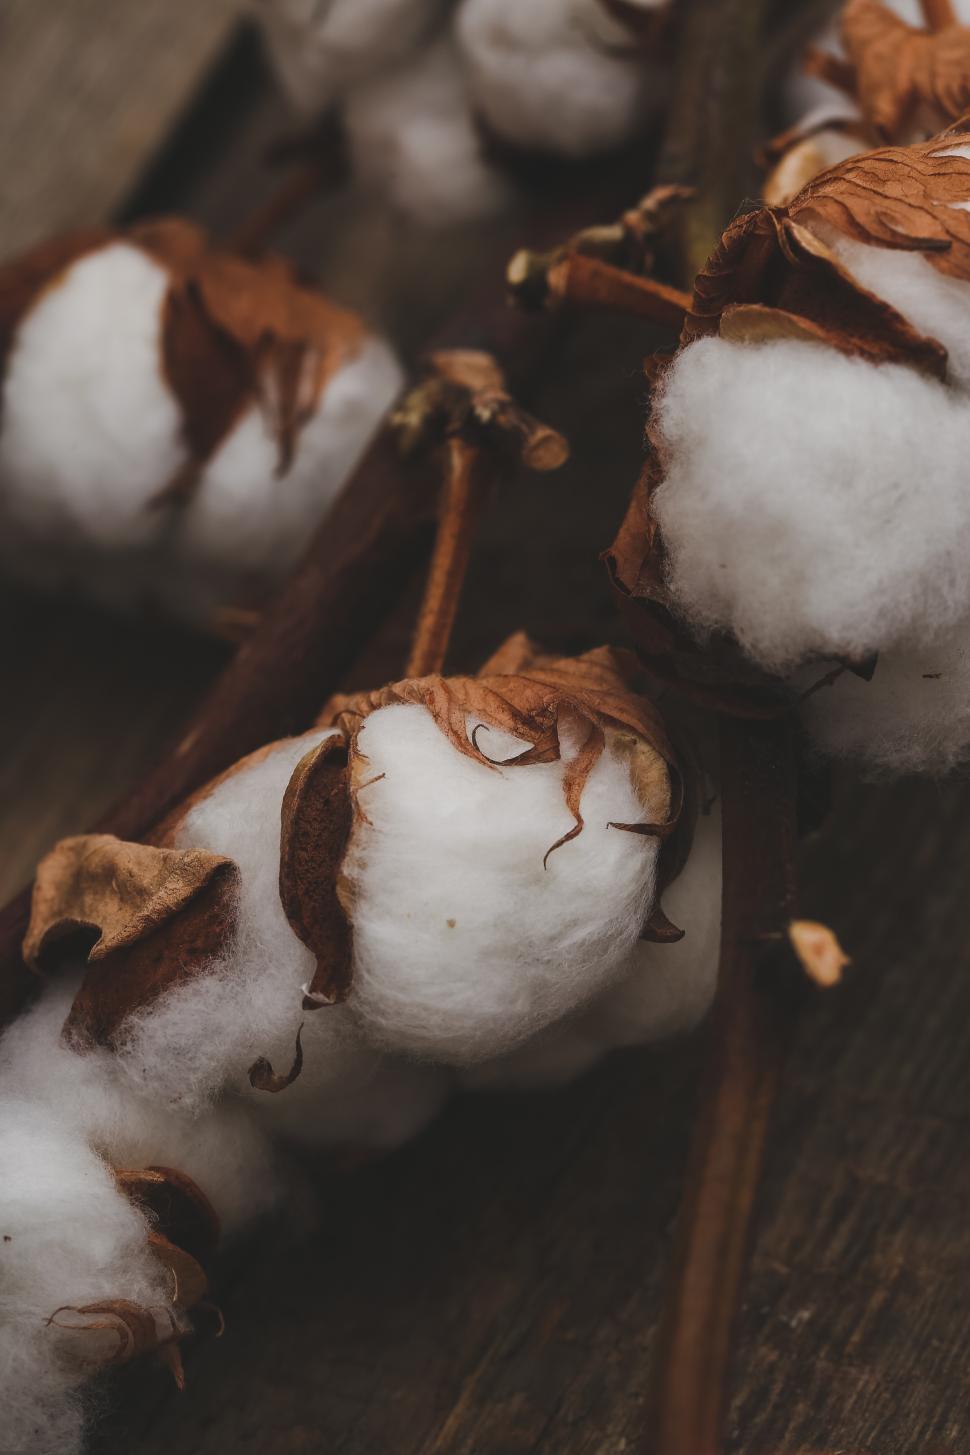 Free Image of Cotton flowers on a table 